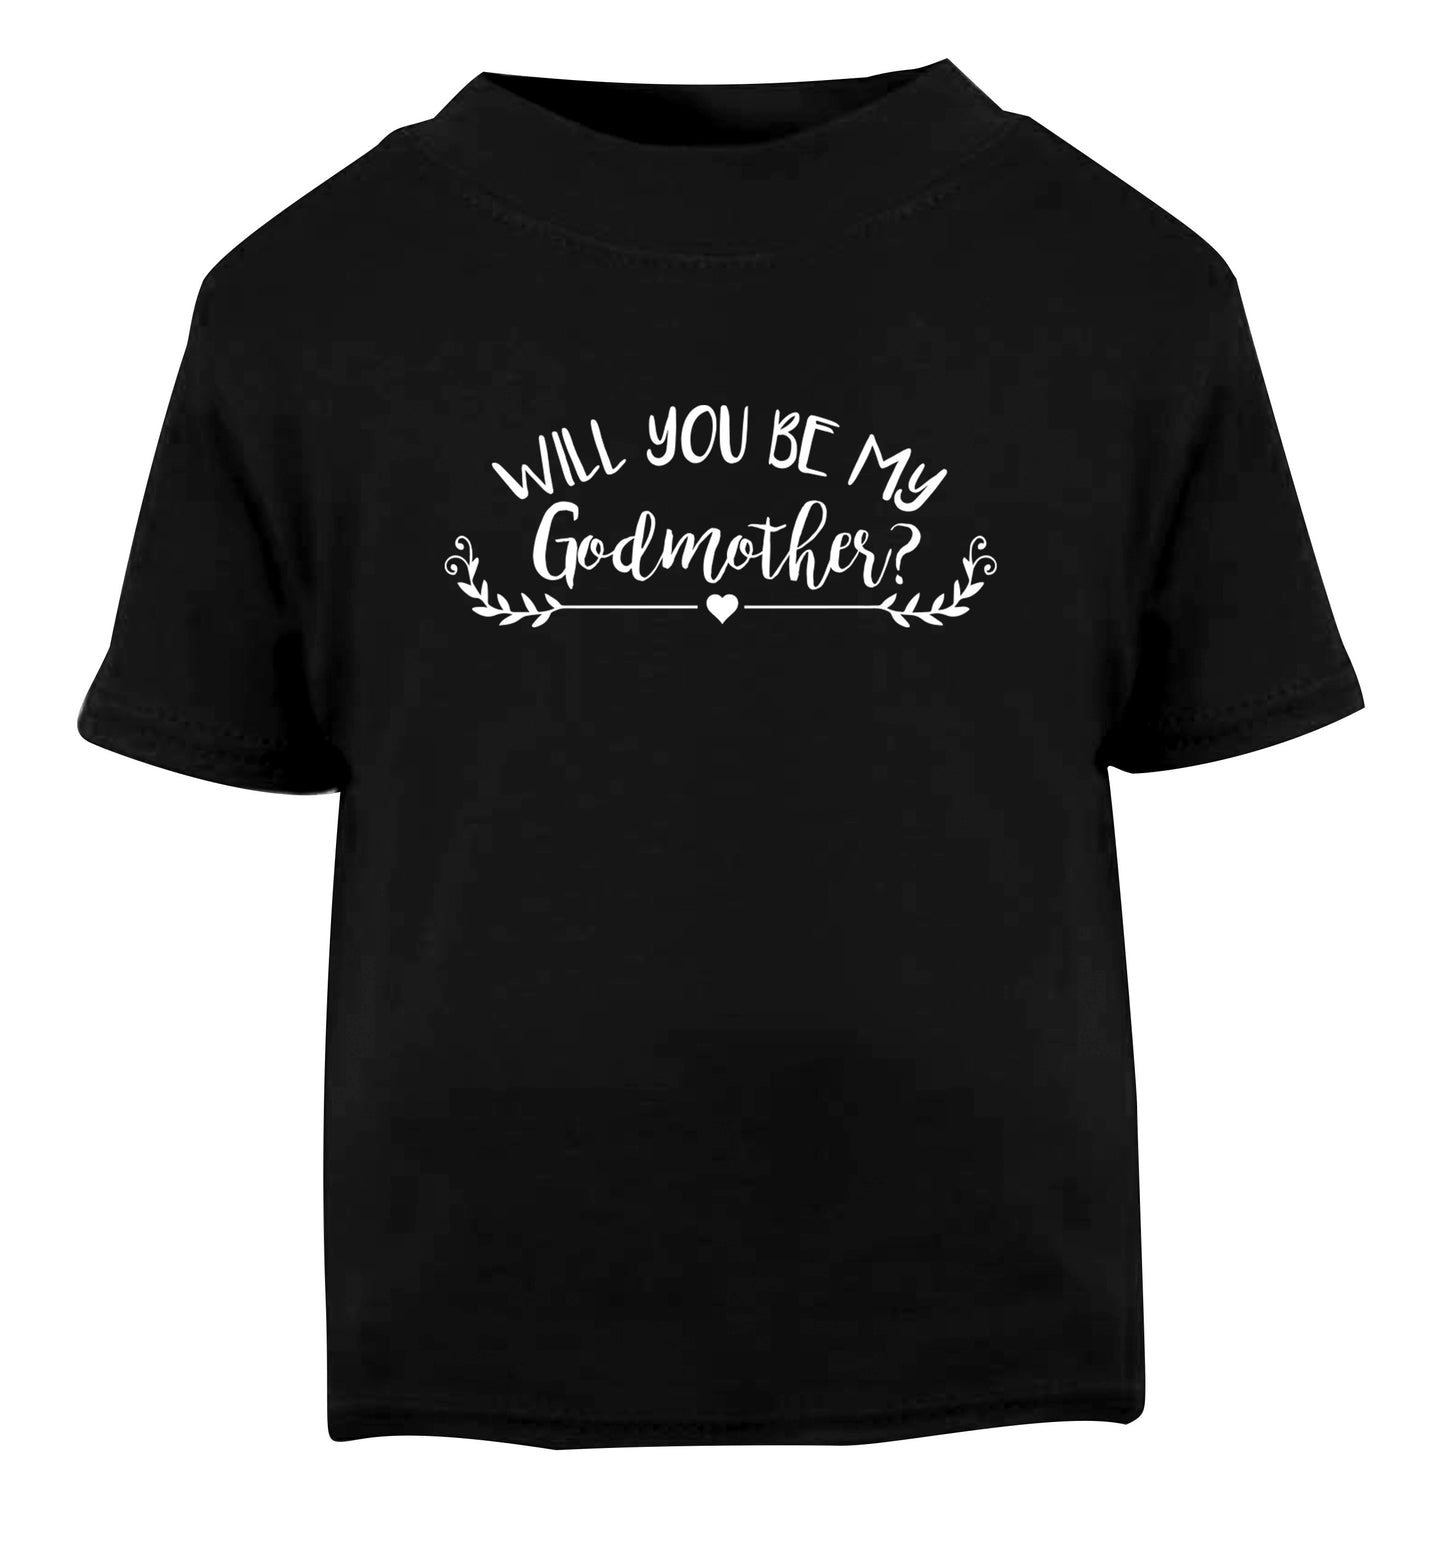 Will you be my godmother? Black Baby Toddler Tshirt 2 years